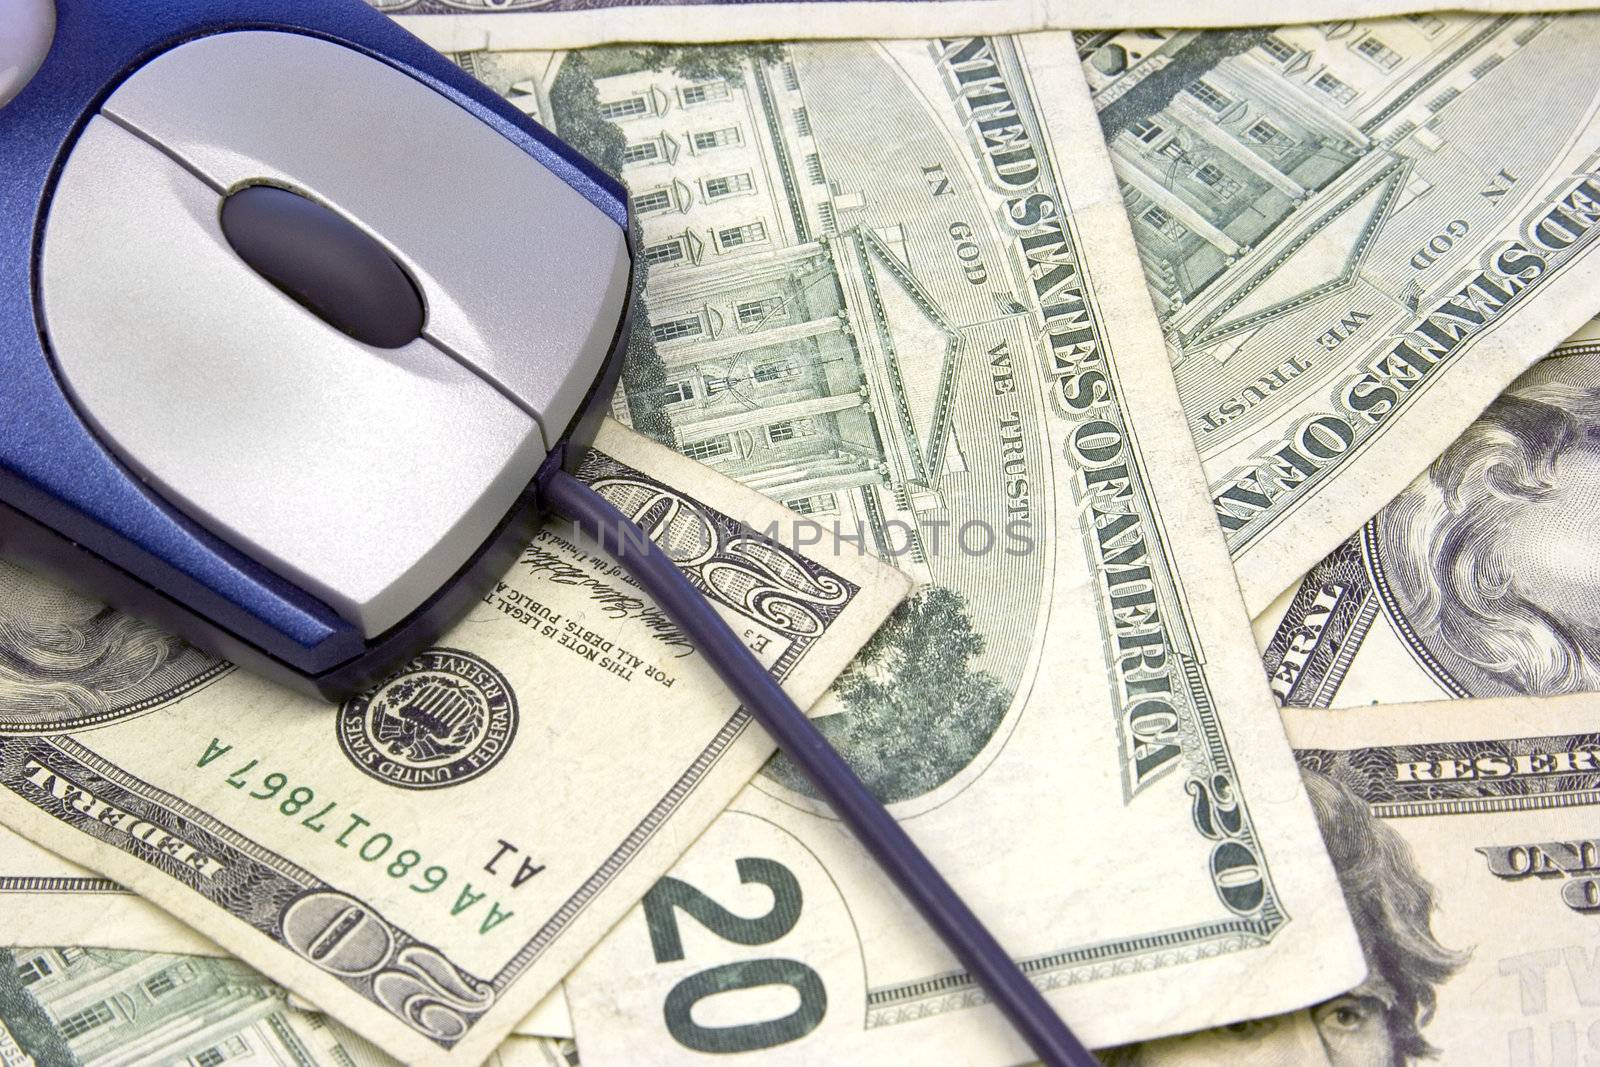 Computer mouse on money